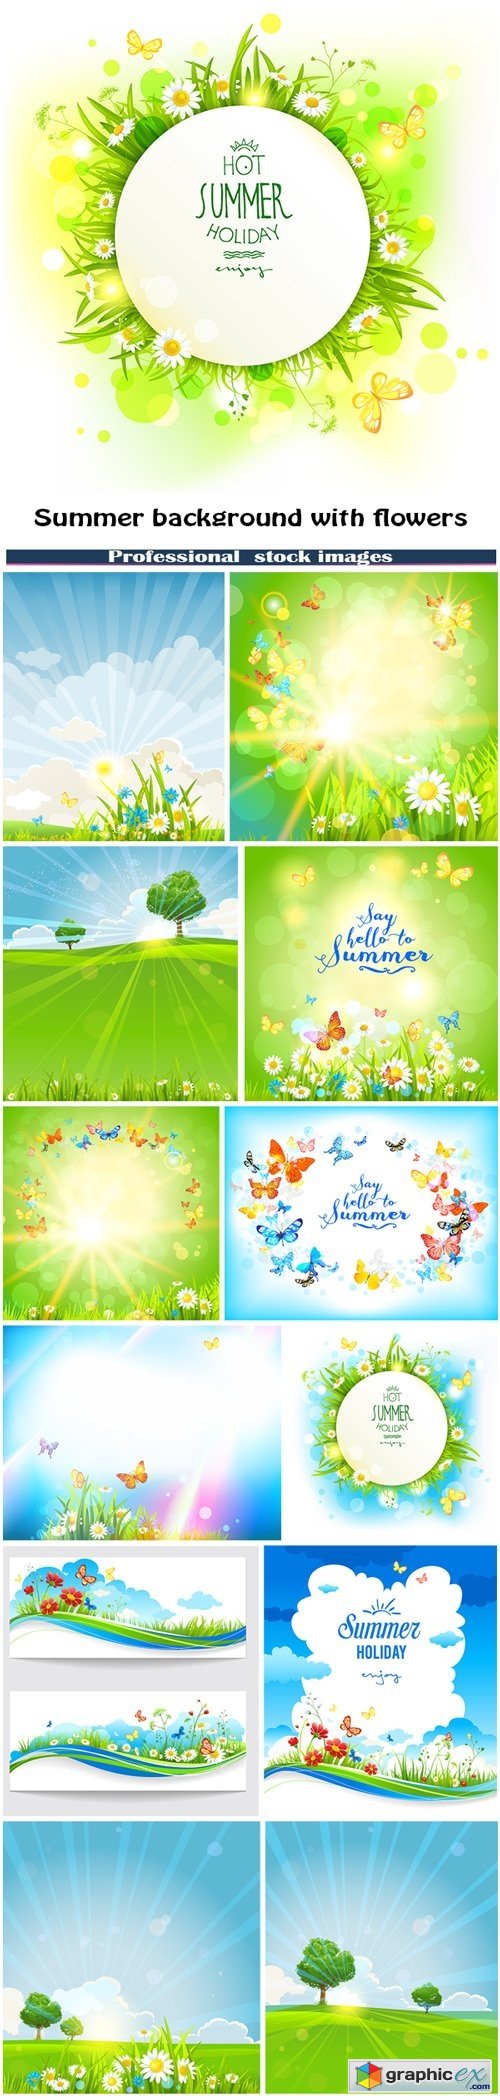 Summer background with flowers